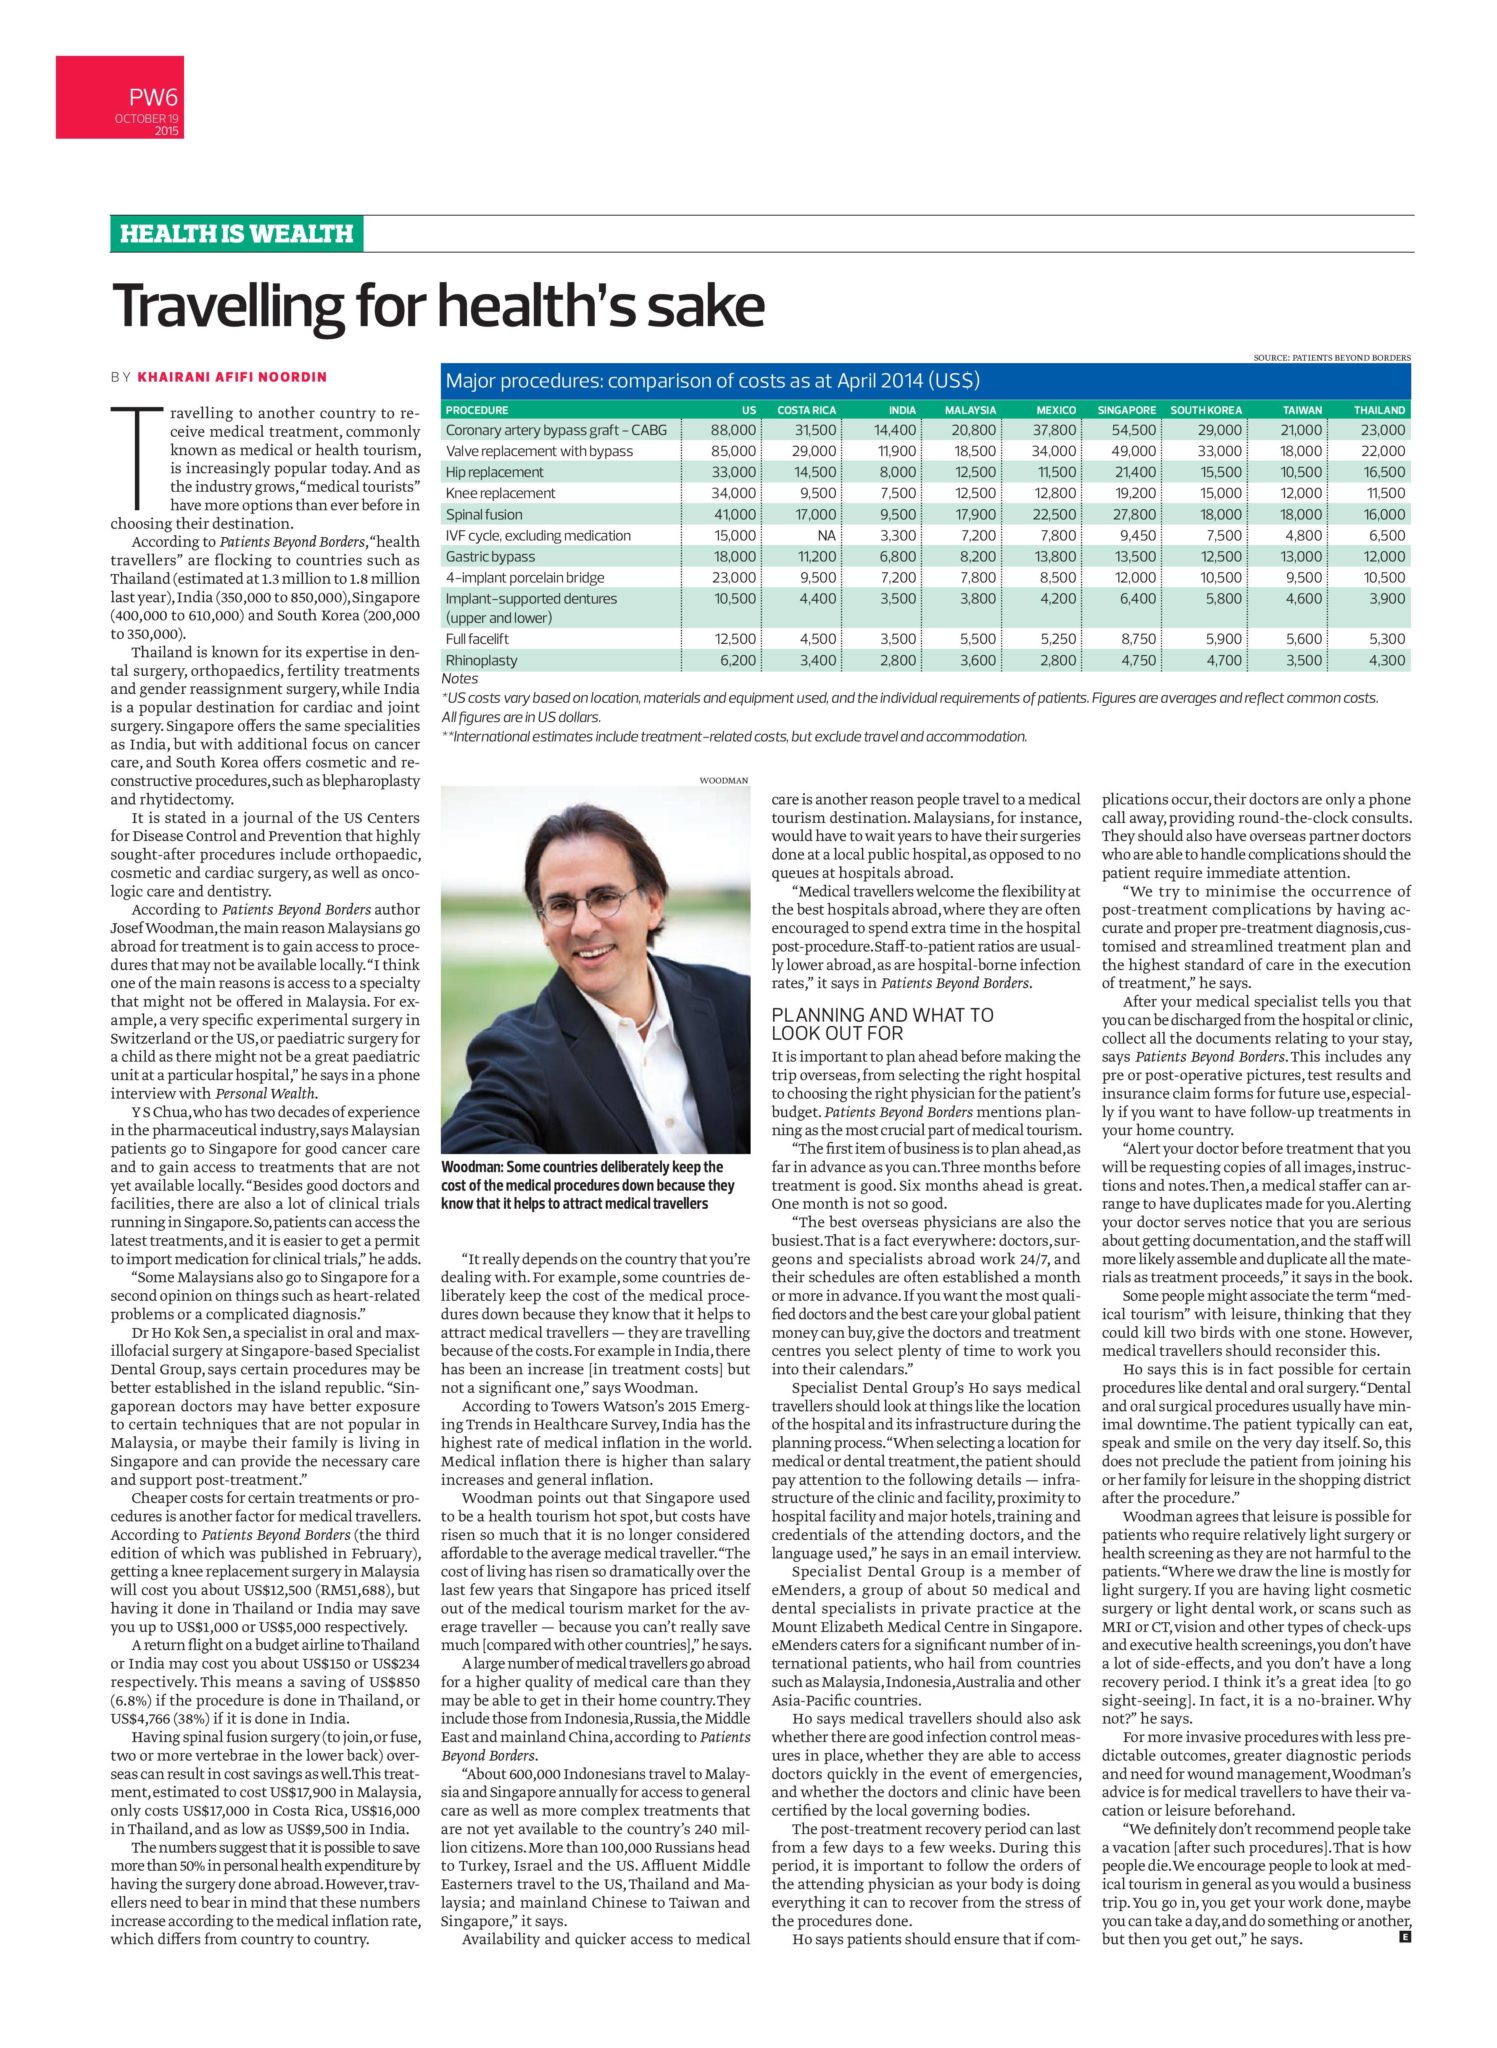 The Edge Malaysia (19 Oct 2015) : Travelling for Health’s Sake